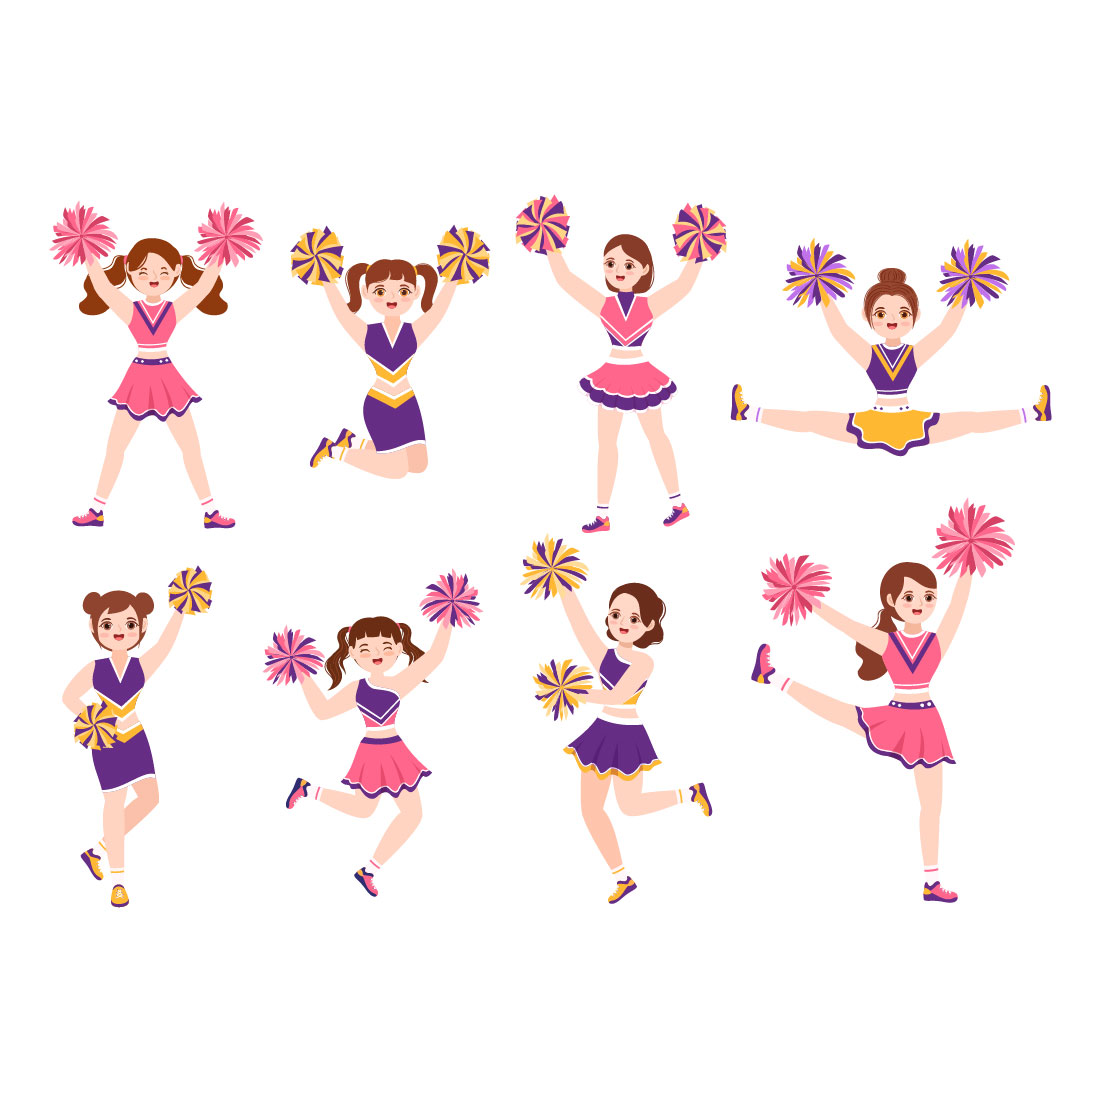 Irresistible image with dancing cheerleader girls in pink outfits.